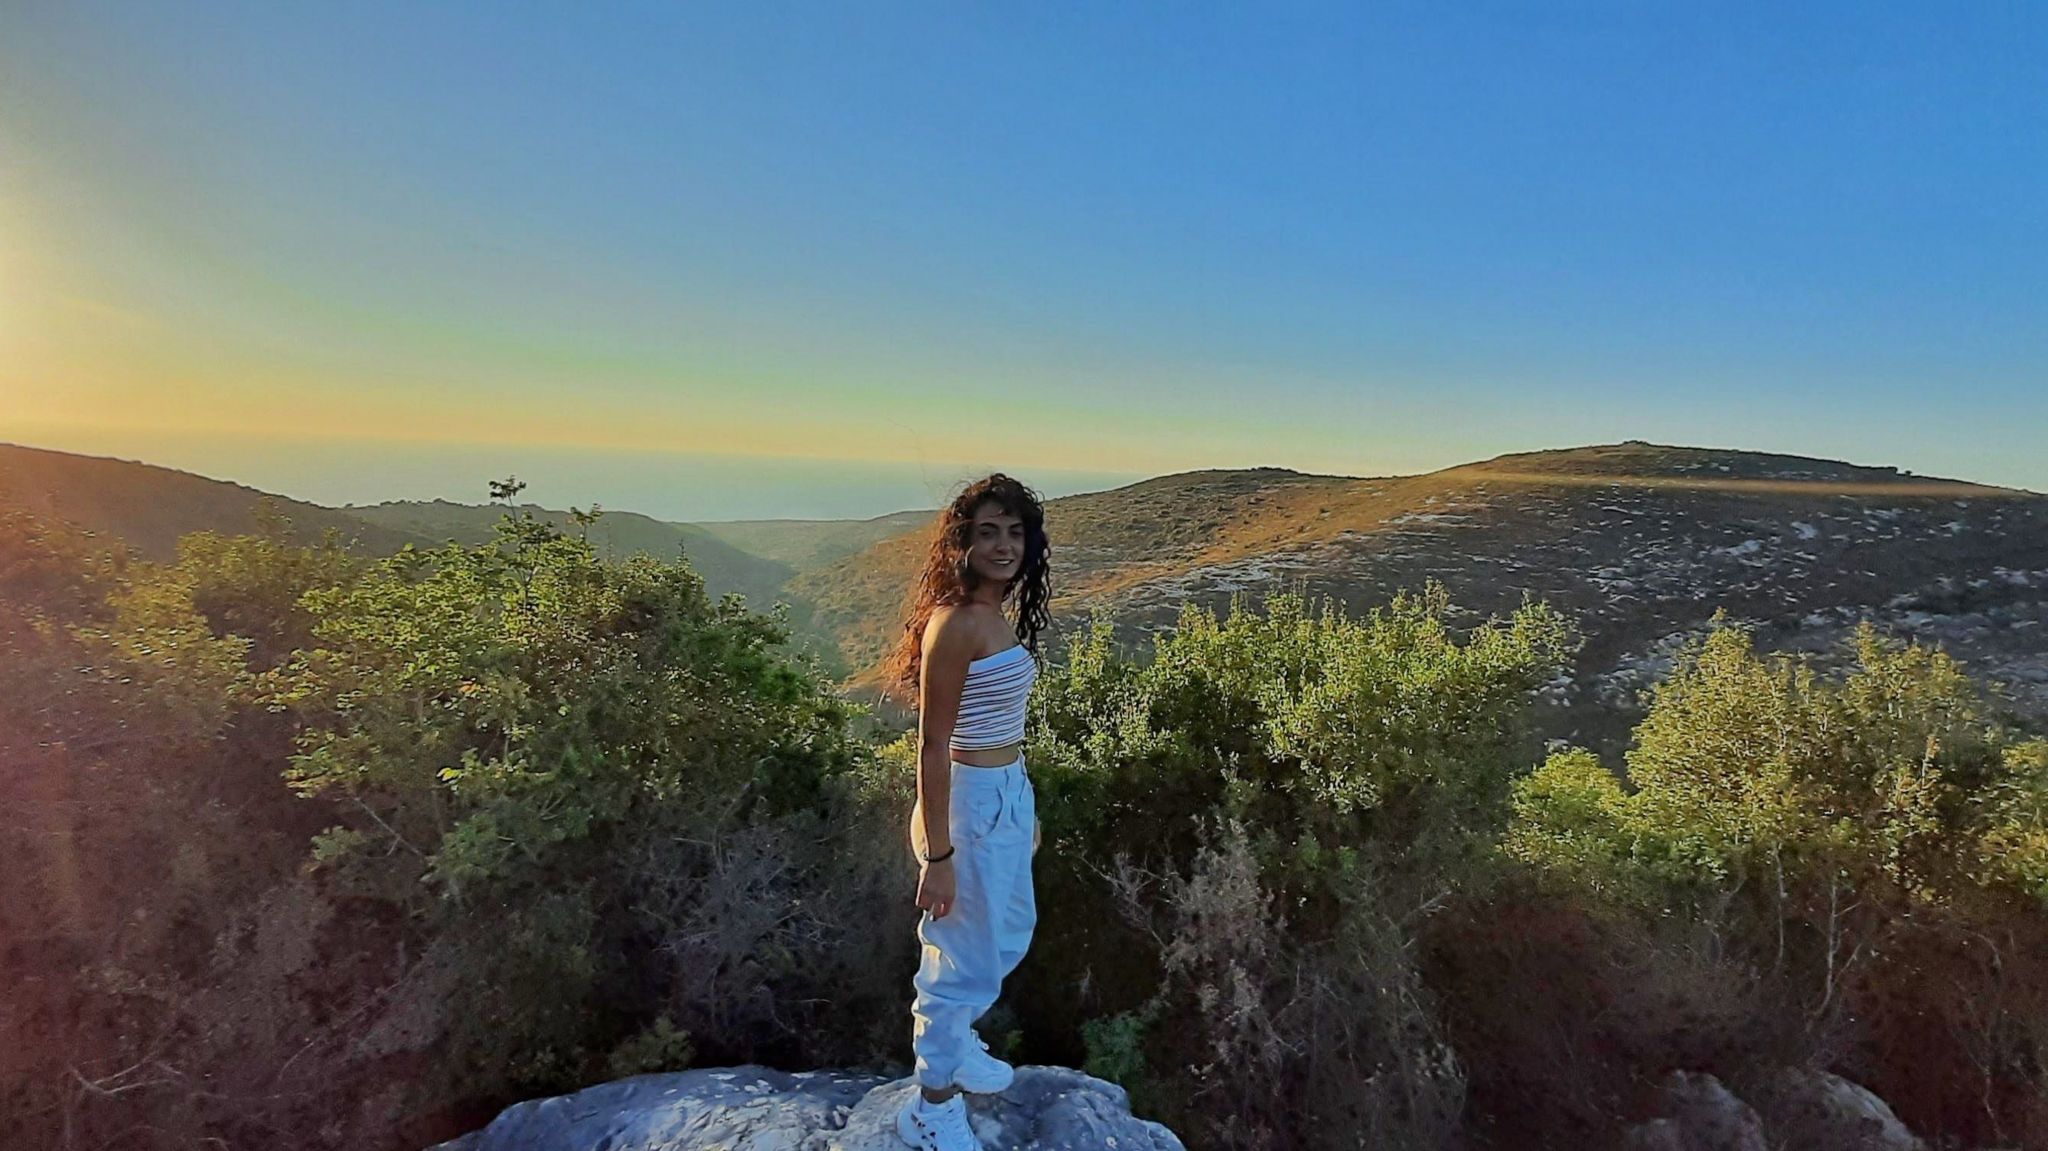 Maria Shaya standing on a rock overlooking a beautiful valley in August 2020